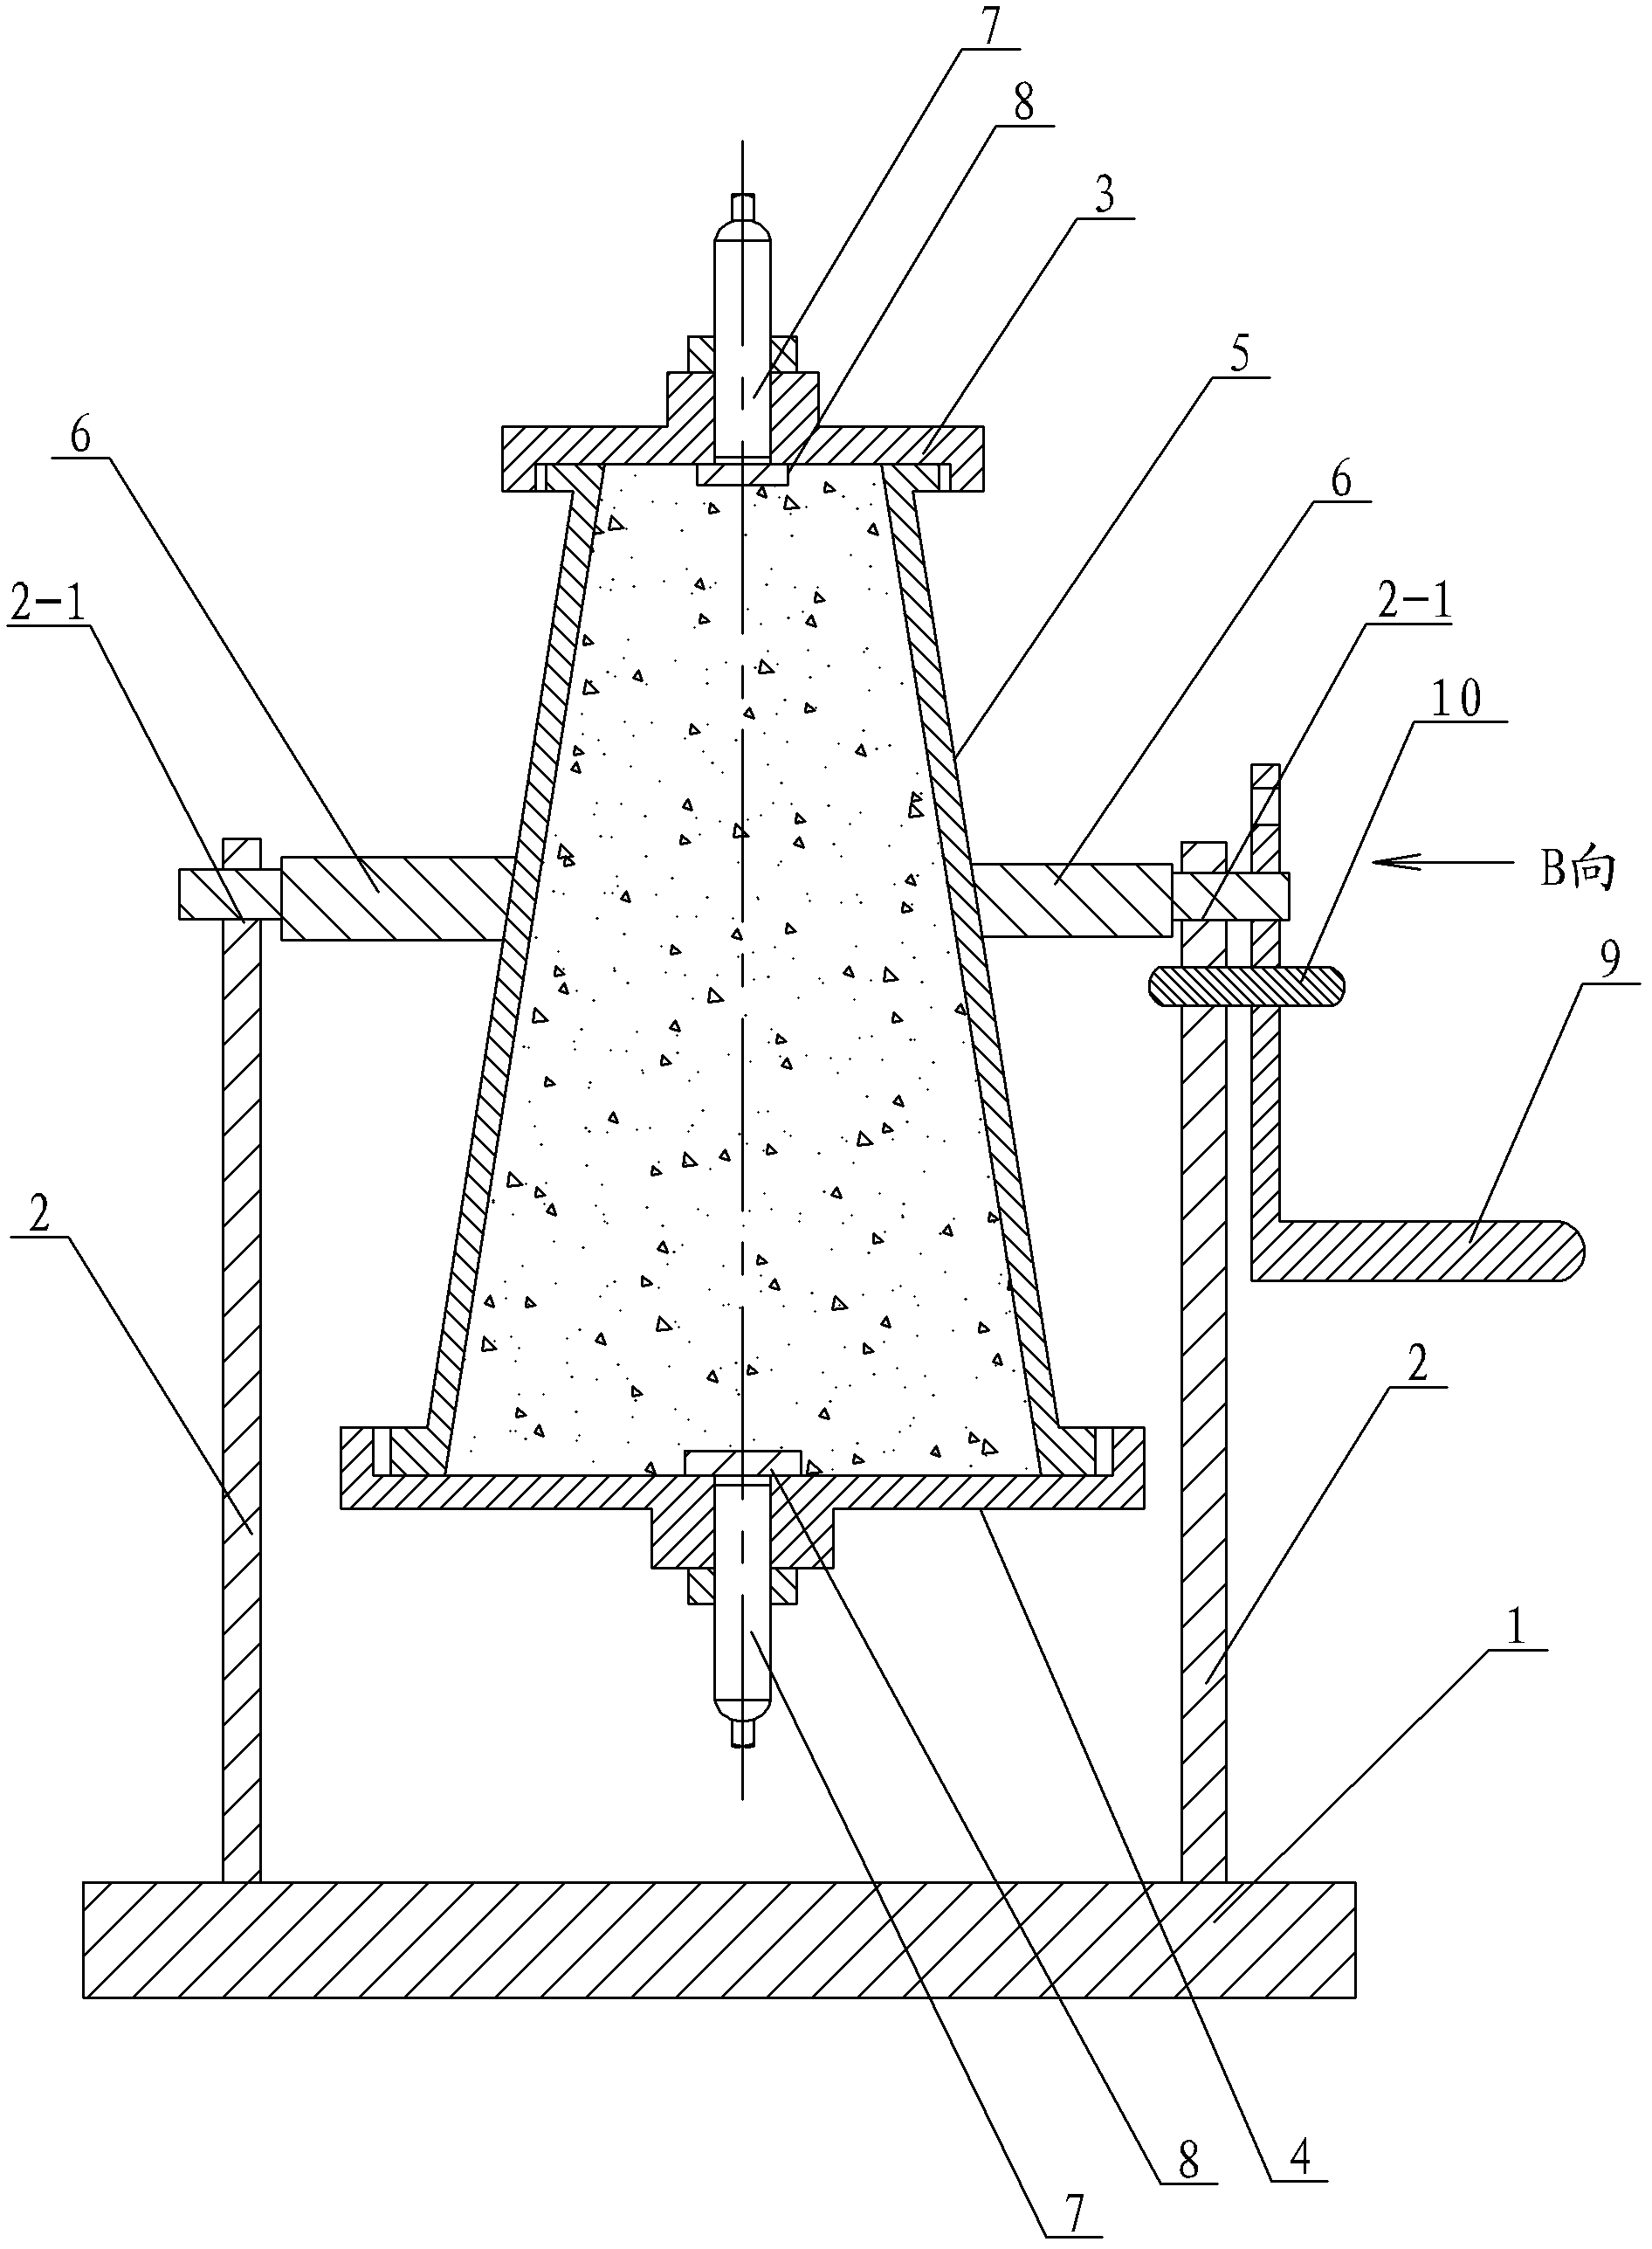 Hand-shaking type concrete self-constriction measuring device